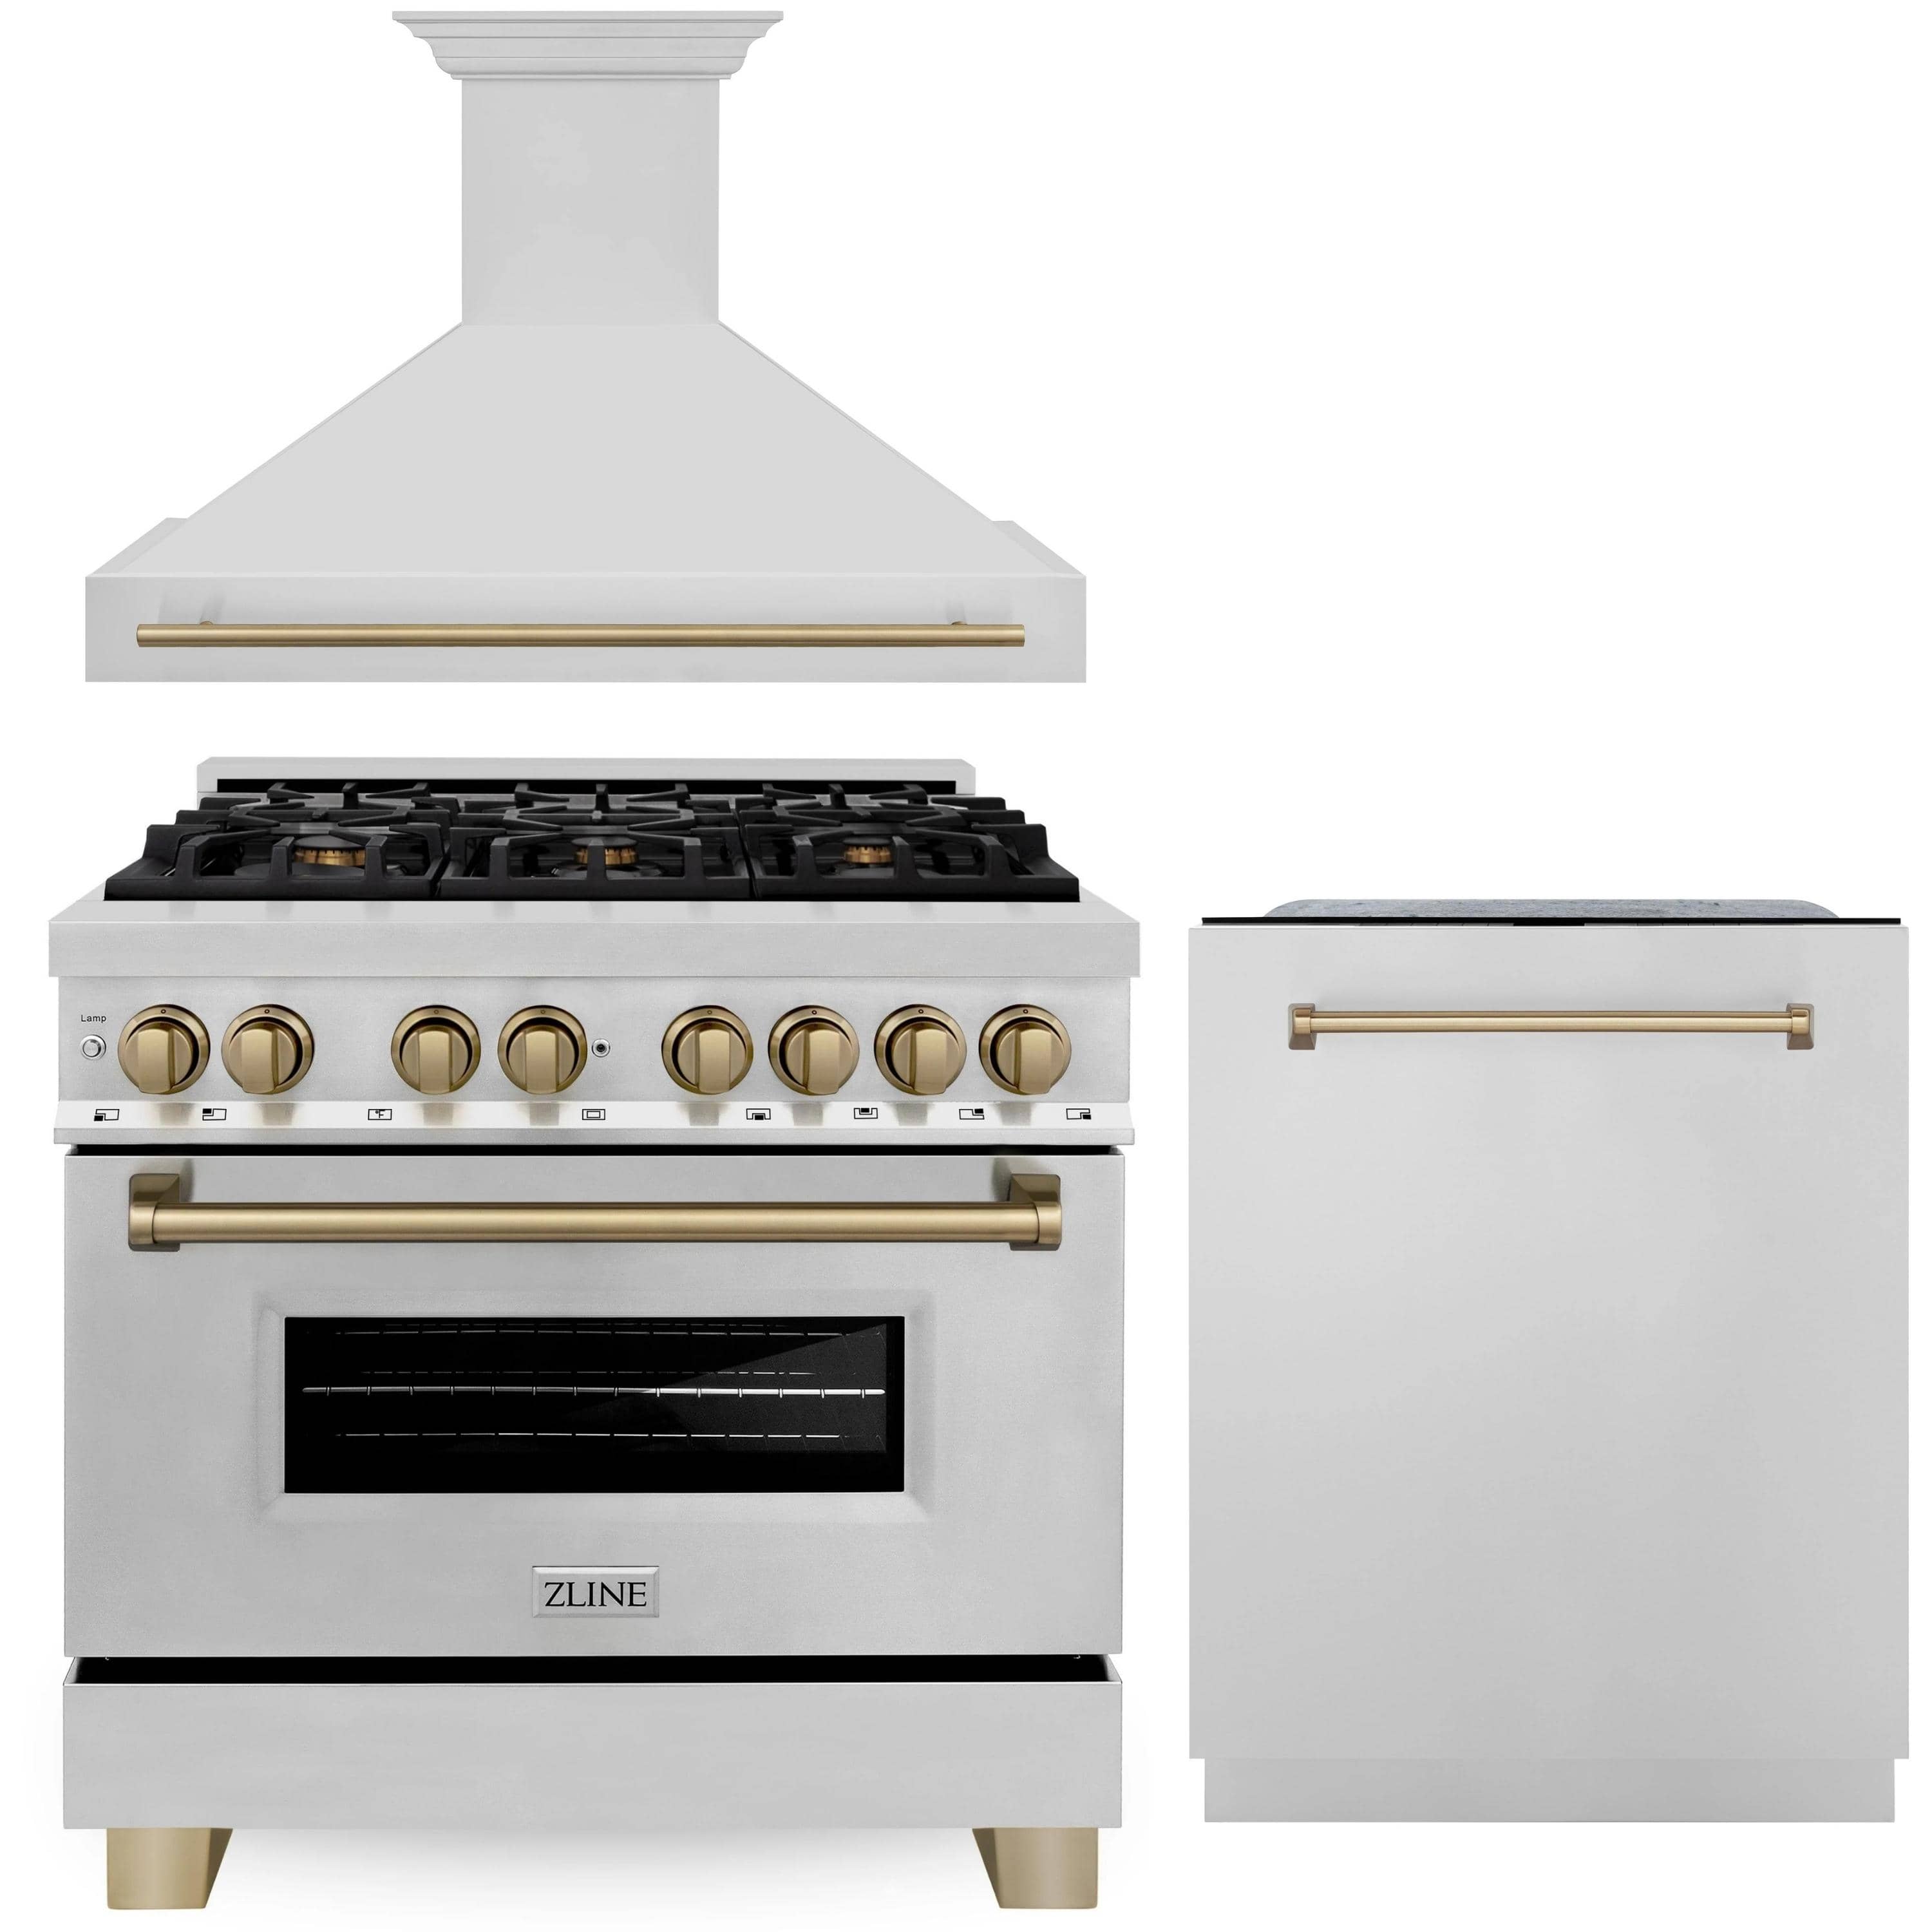 ZLINE Autograph Edition 3-Piece Appliance Package - 36-Inch Dual Fuel Range, Wall Mounted Range Hood, and 24-Inch Tall Tub Dishwasher in Stainless Steel with Champagne Bronze Trim (3AKP-RARHDWM36-CB)